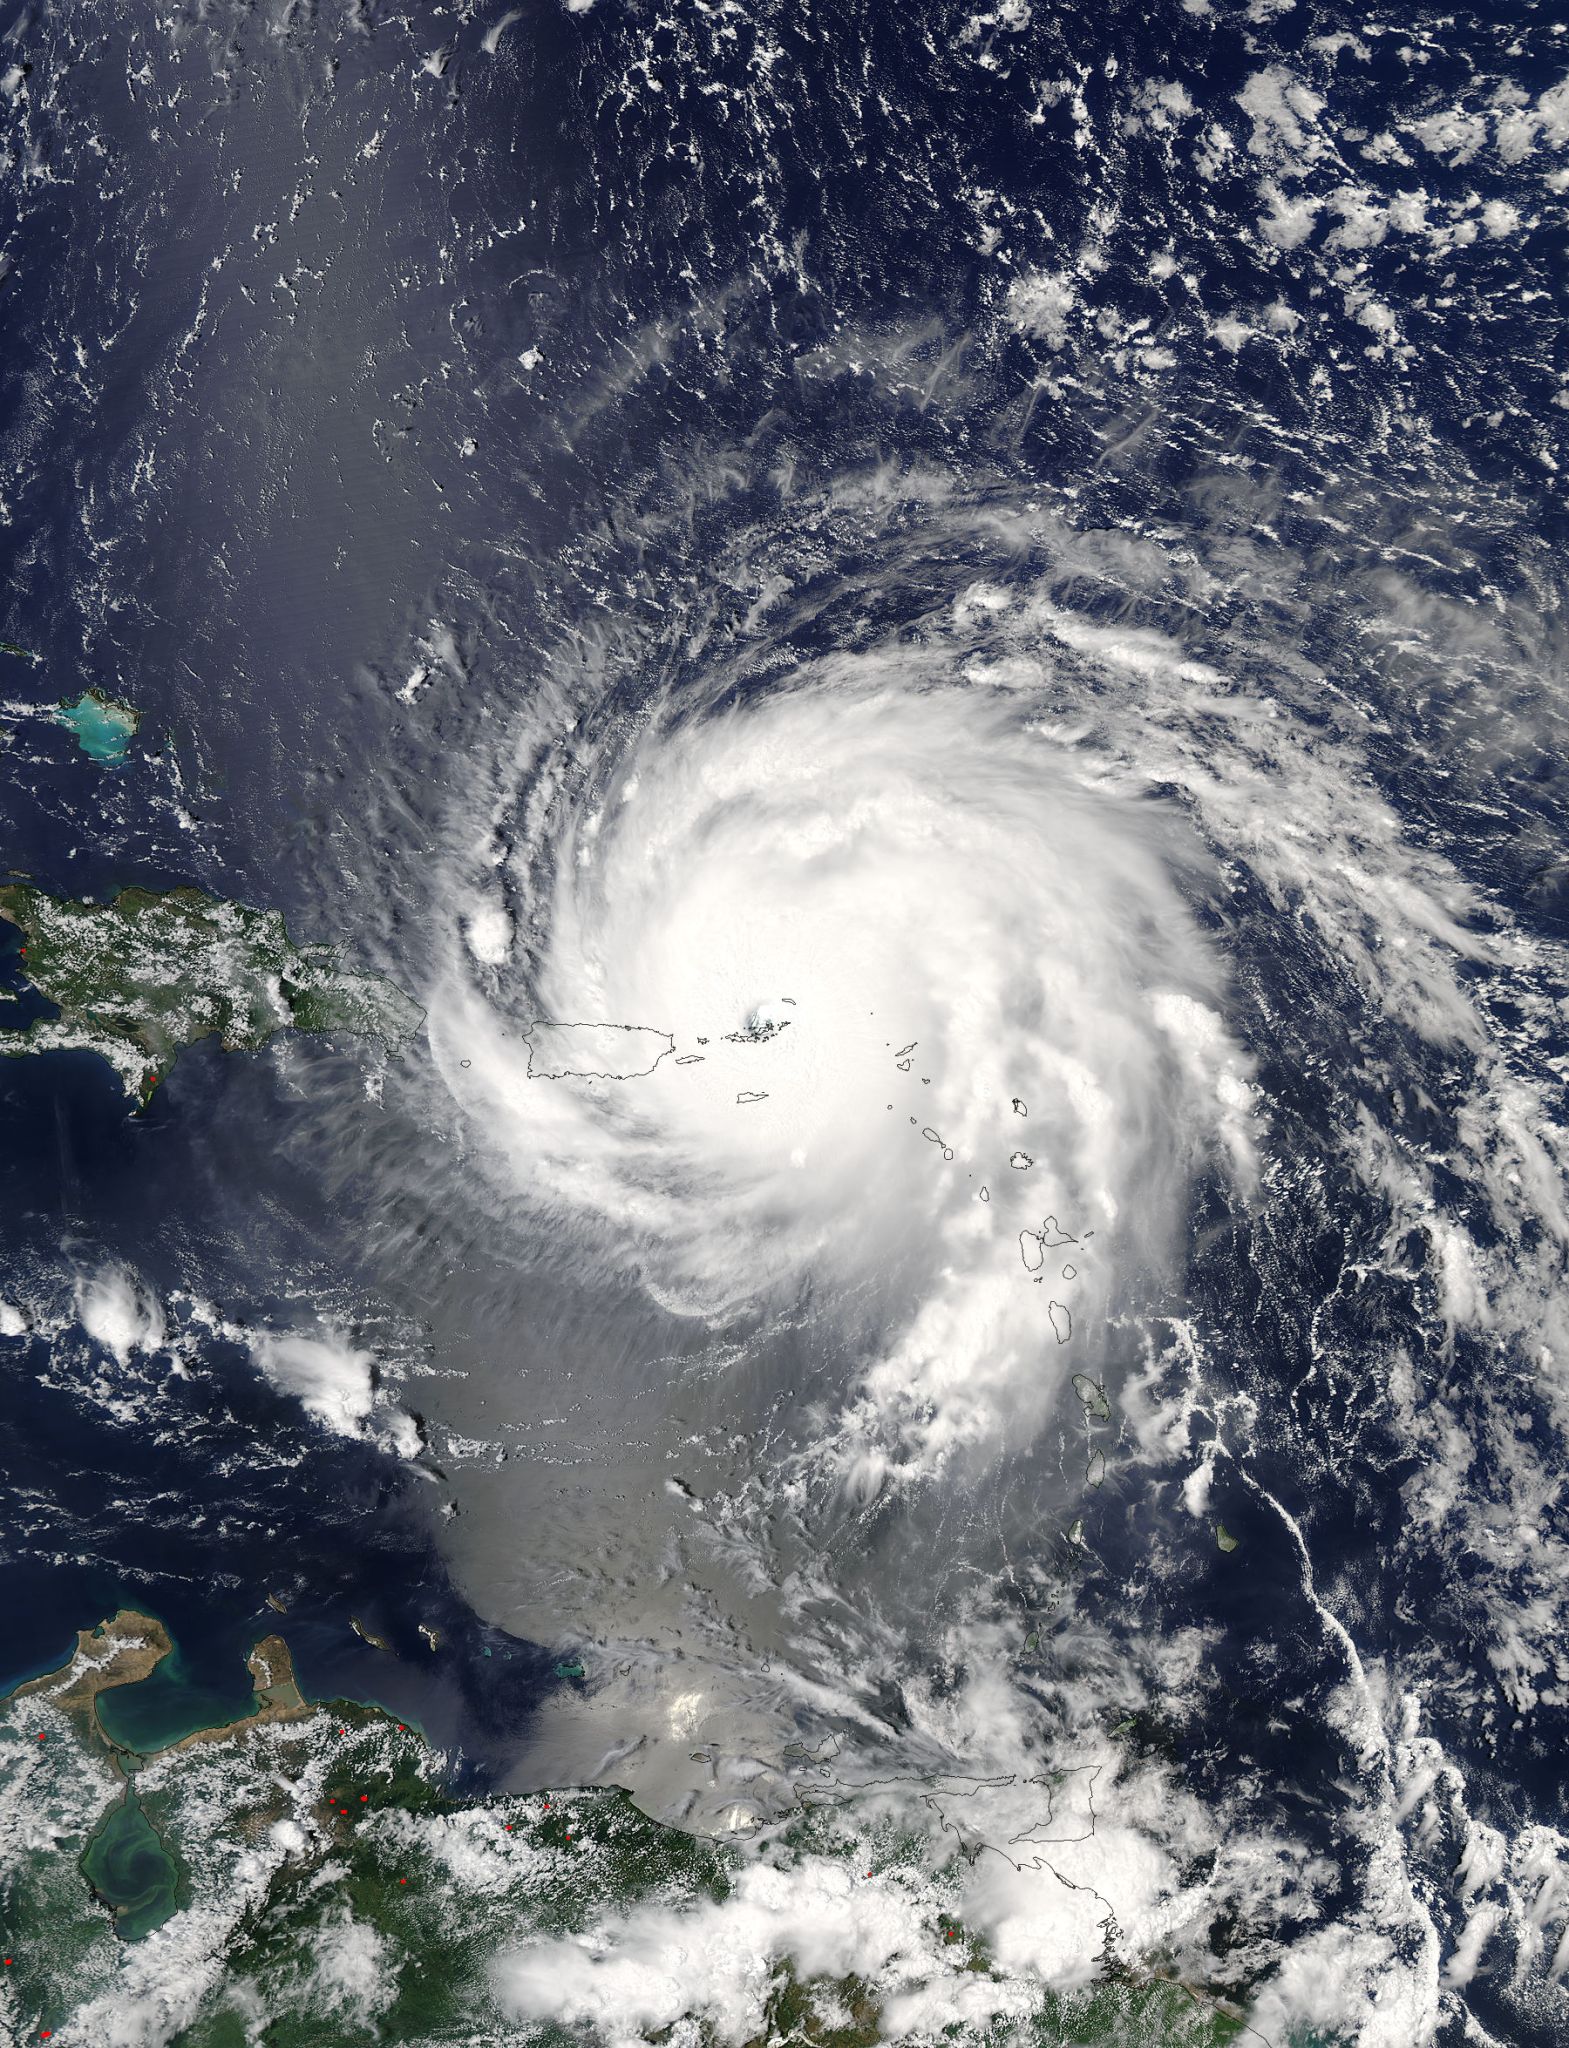 Satellite image of Irma, a swirling cloud mass over the Atlantic Ocean.